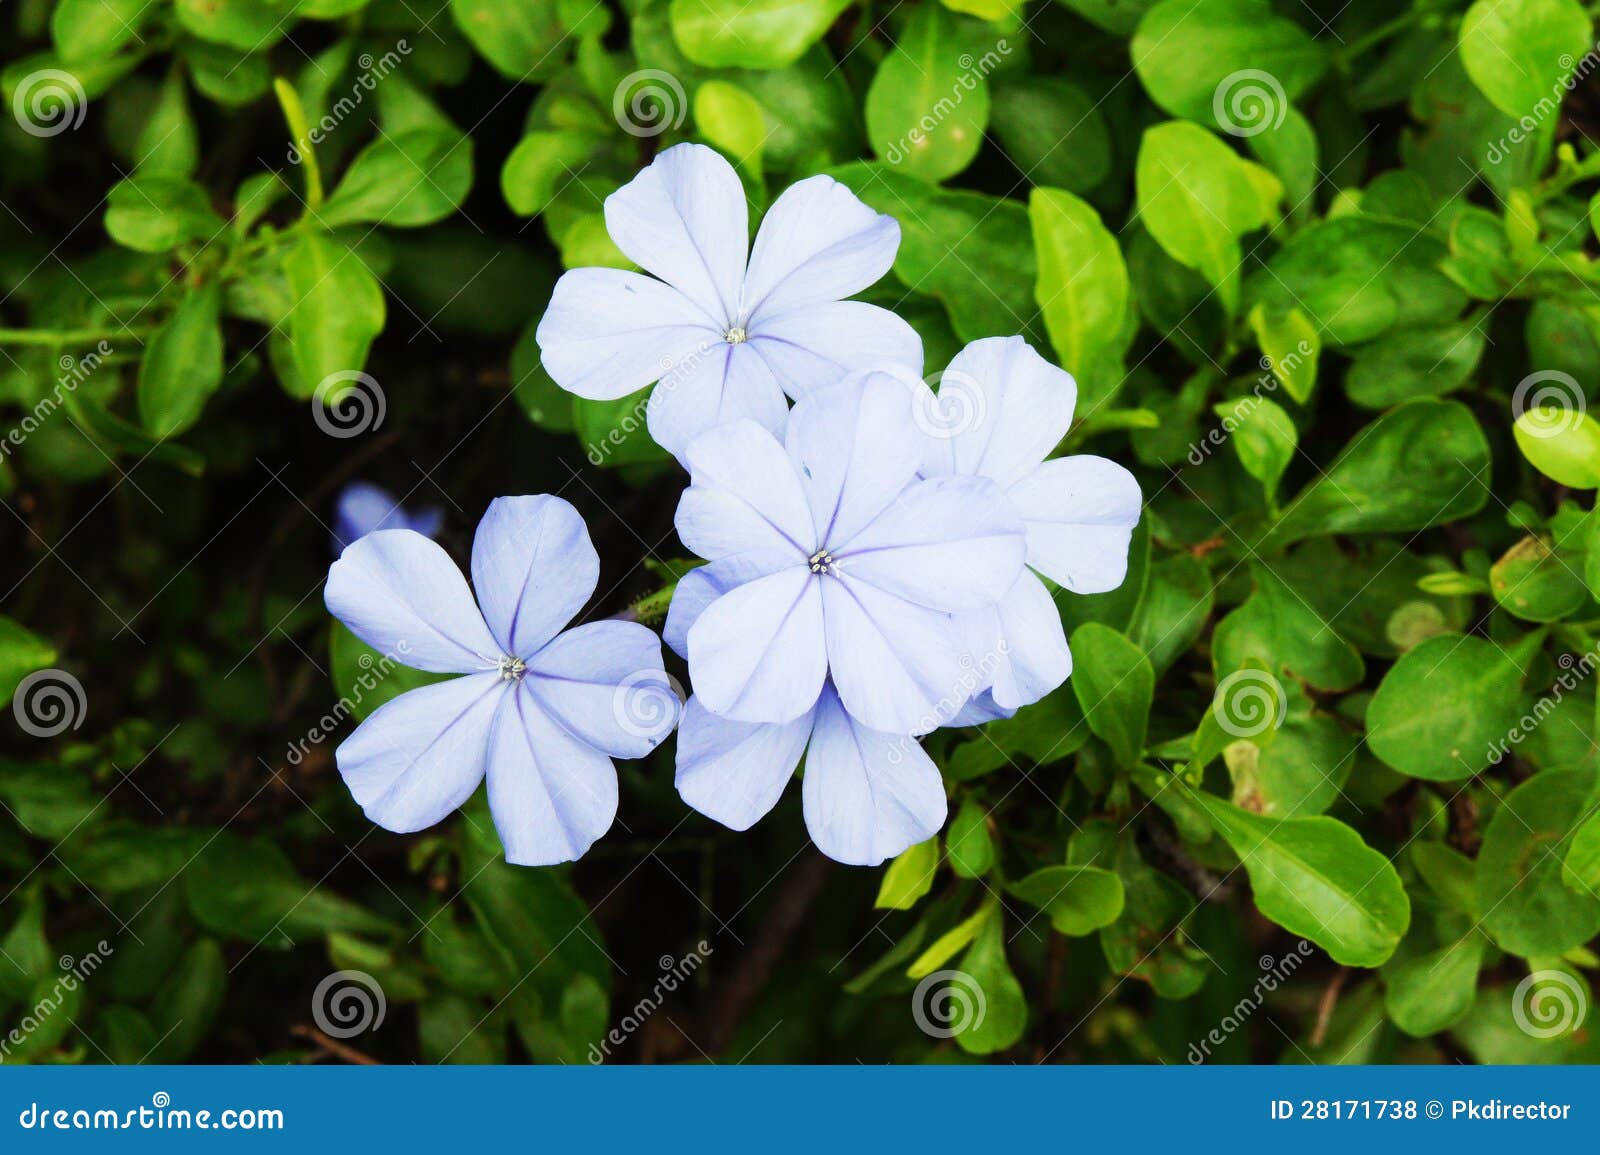 18,18 Lam Flower Photos   Free & Royalty Free Stock Photos from ...